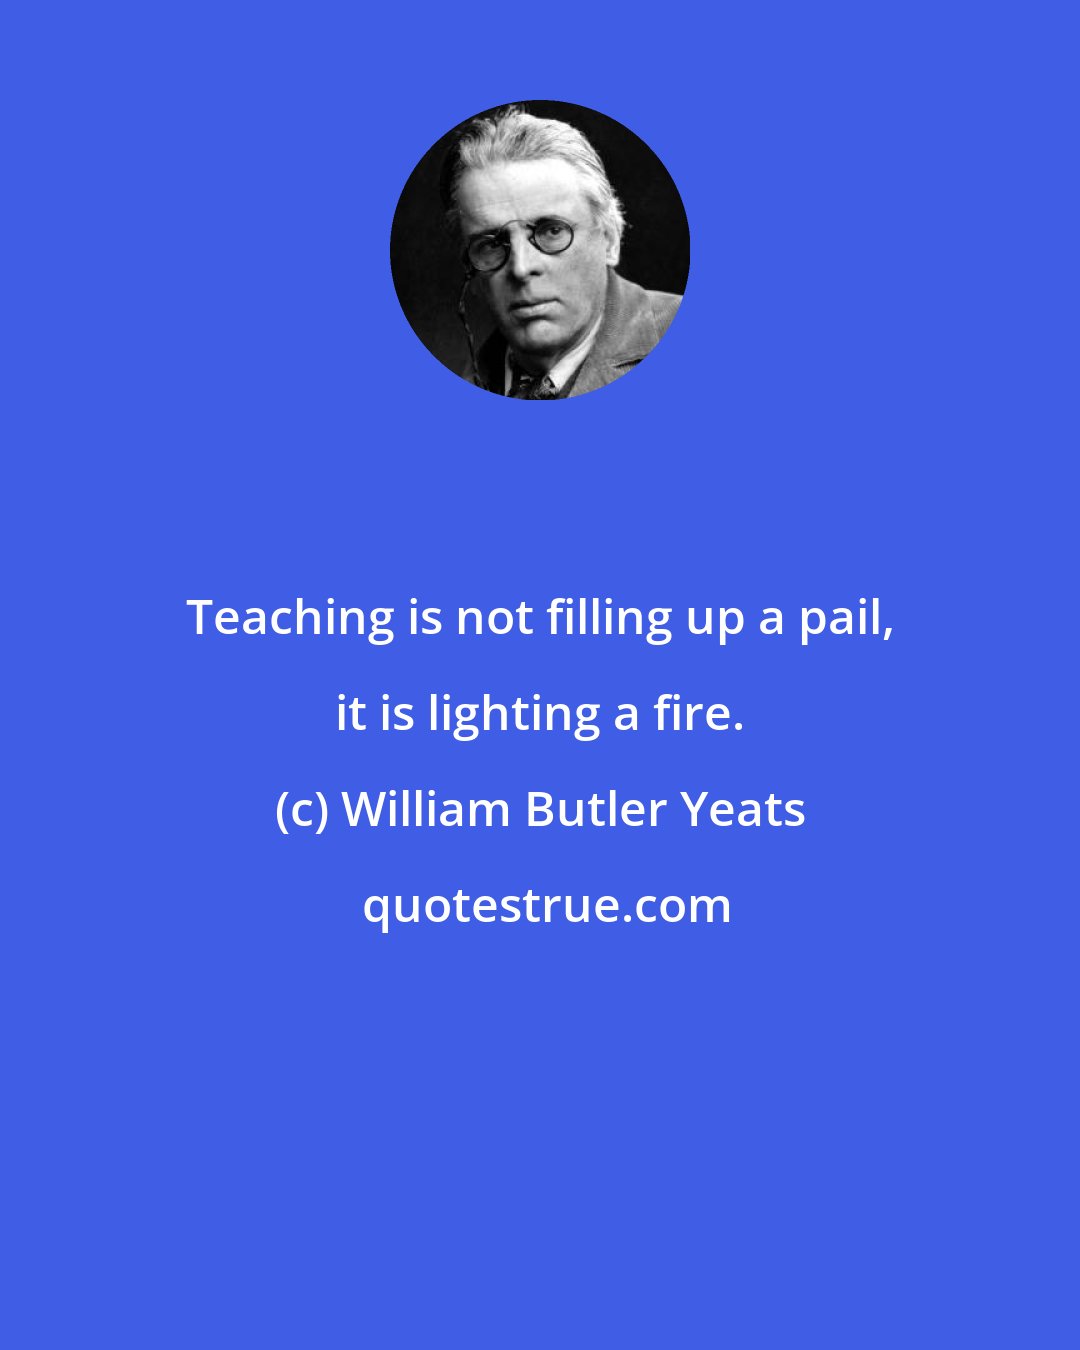 William Butler Yeats: Teaching is not filling up a pail, it is lighting a fire.